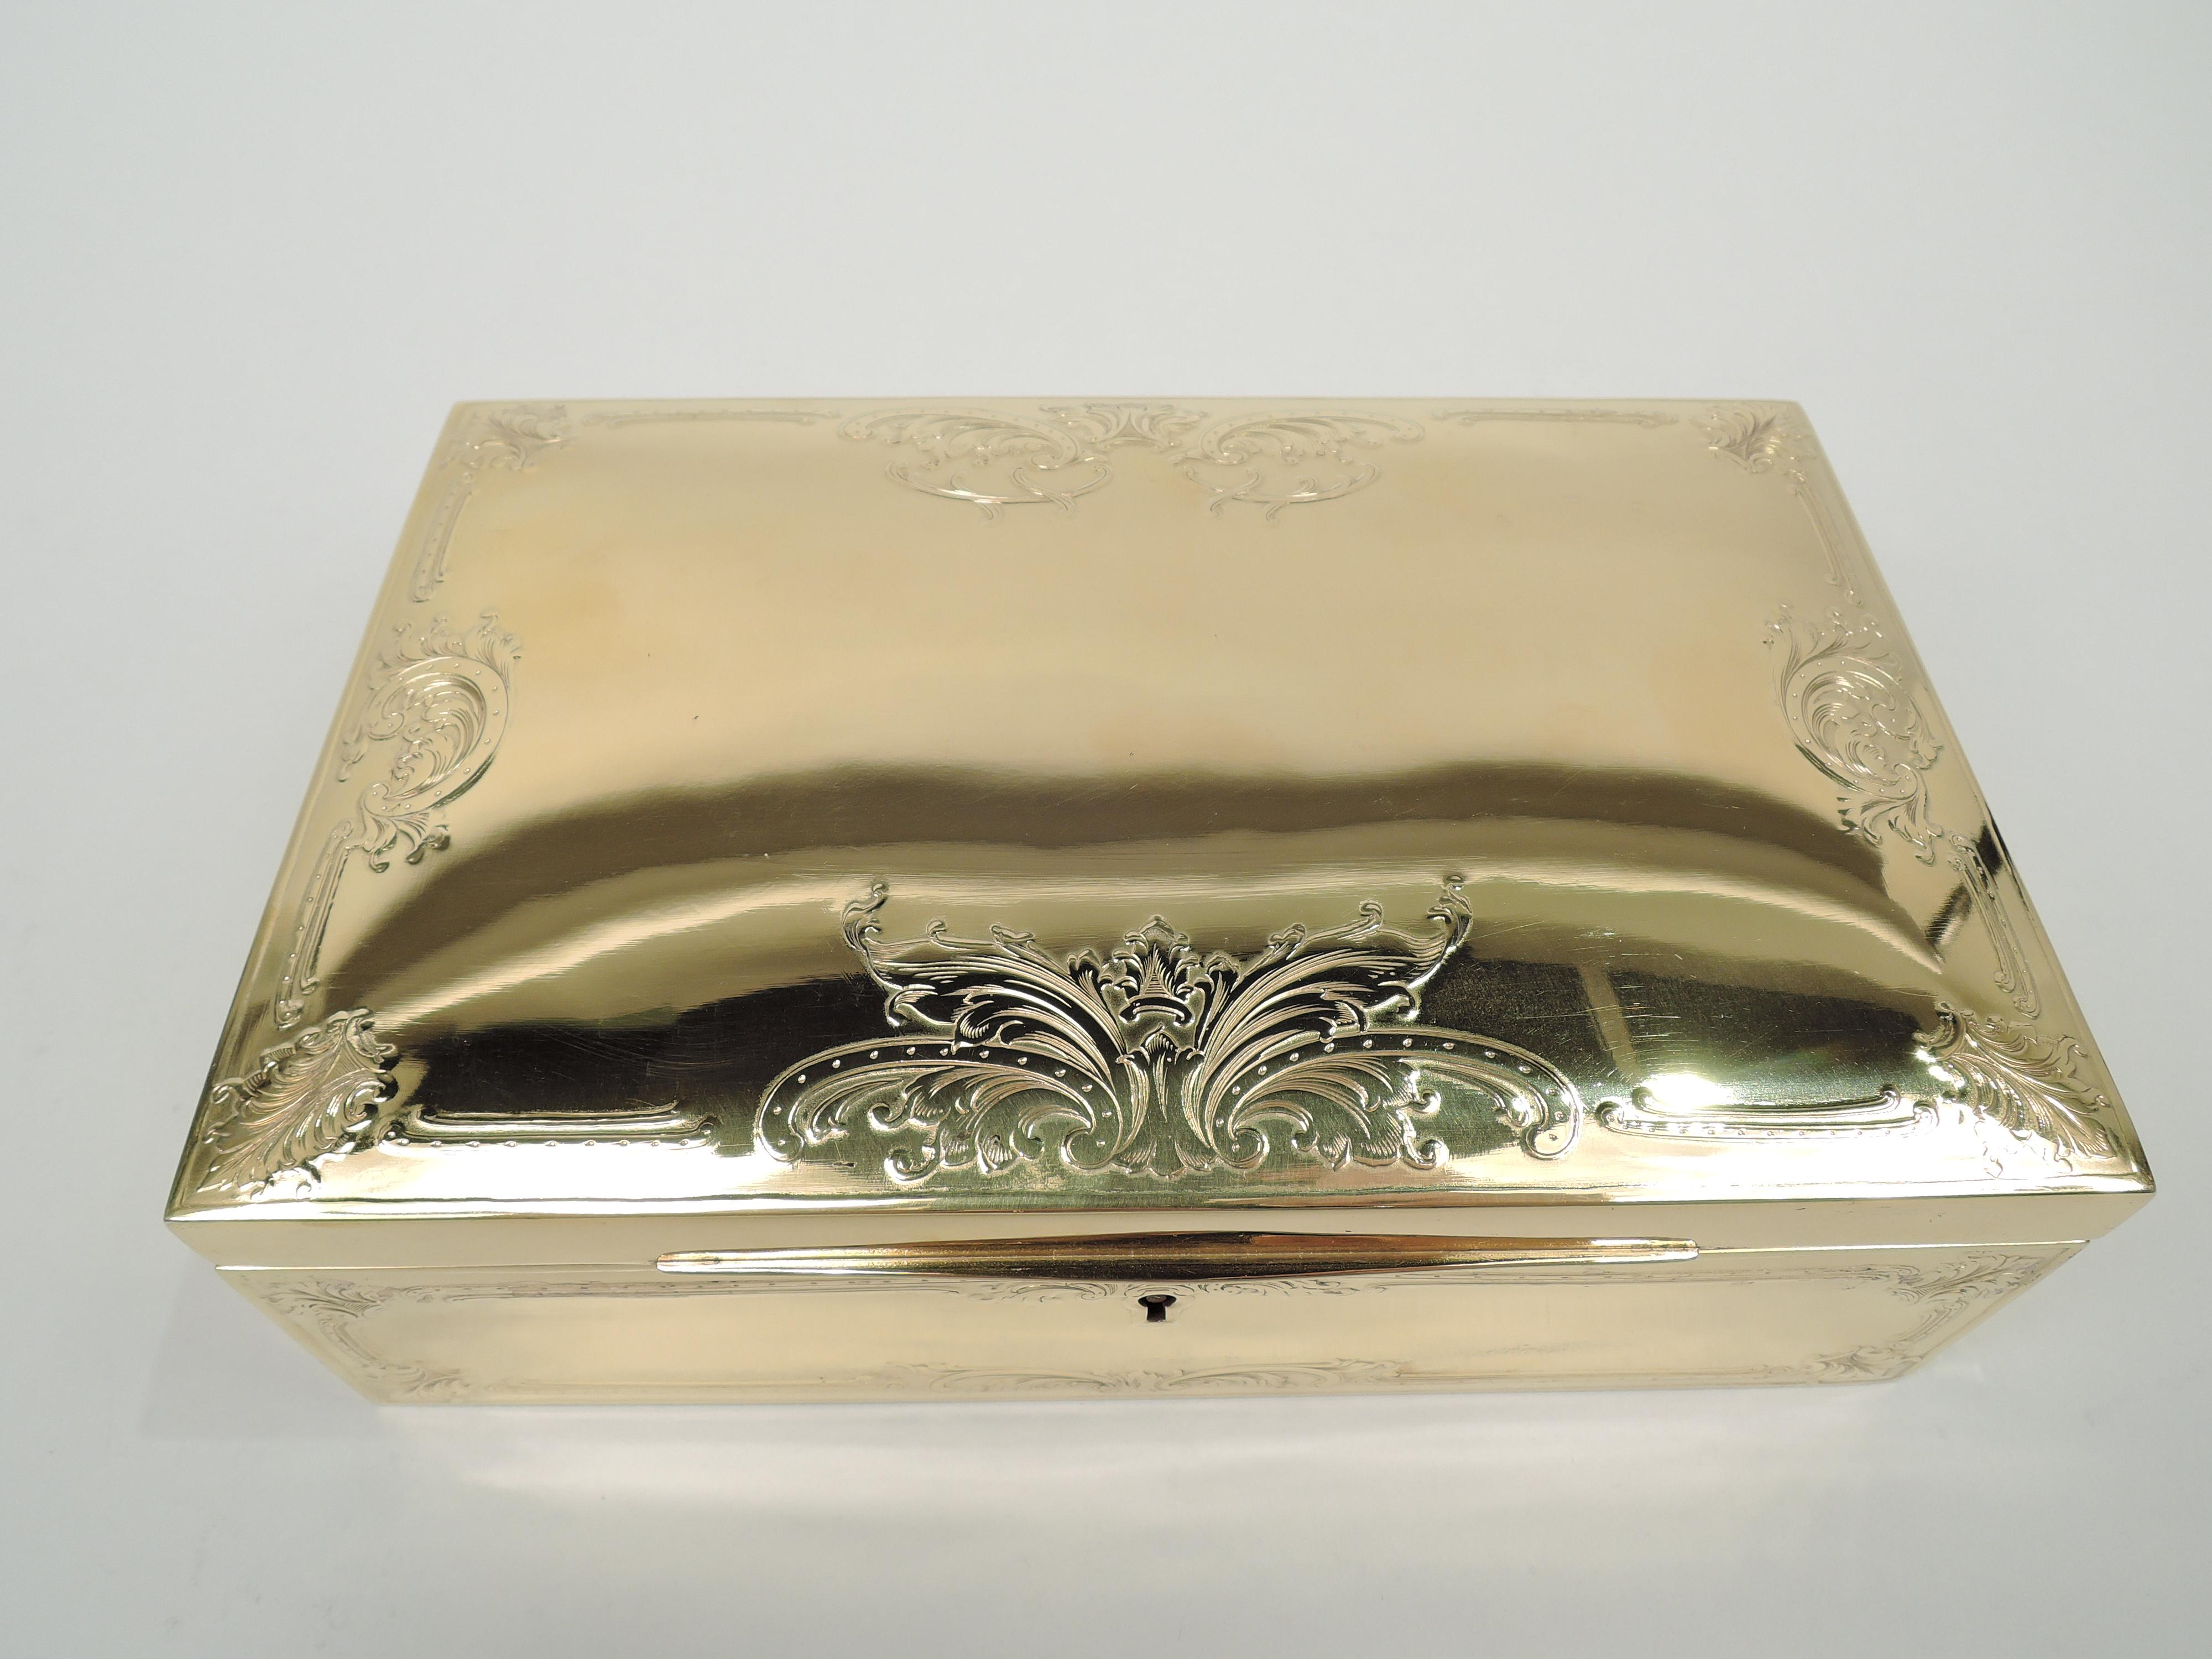 Edwardian classical gilt sterling silver jewelry box. Made by Ahrendt & Kautzman in Newark, ca 1910. Rectangular with straight sides. Cover hinged with tapering tab; top gently curved with acid-etched leafing scroll border. Velvet-lined interior.